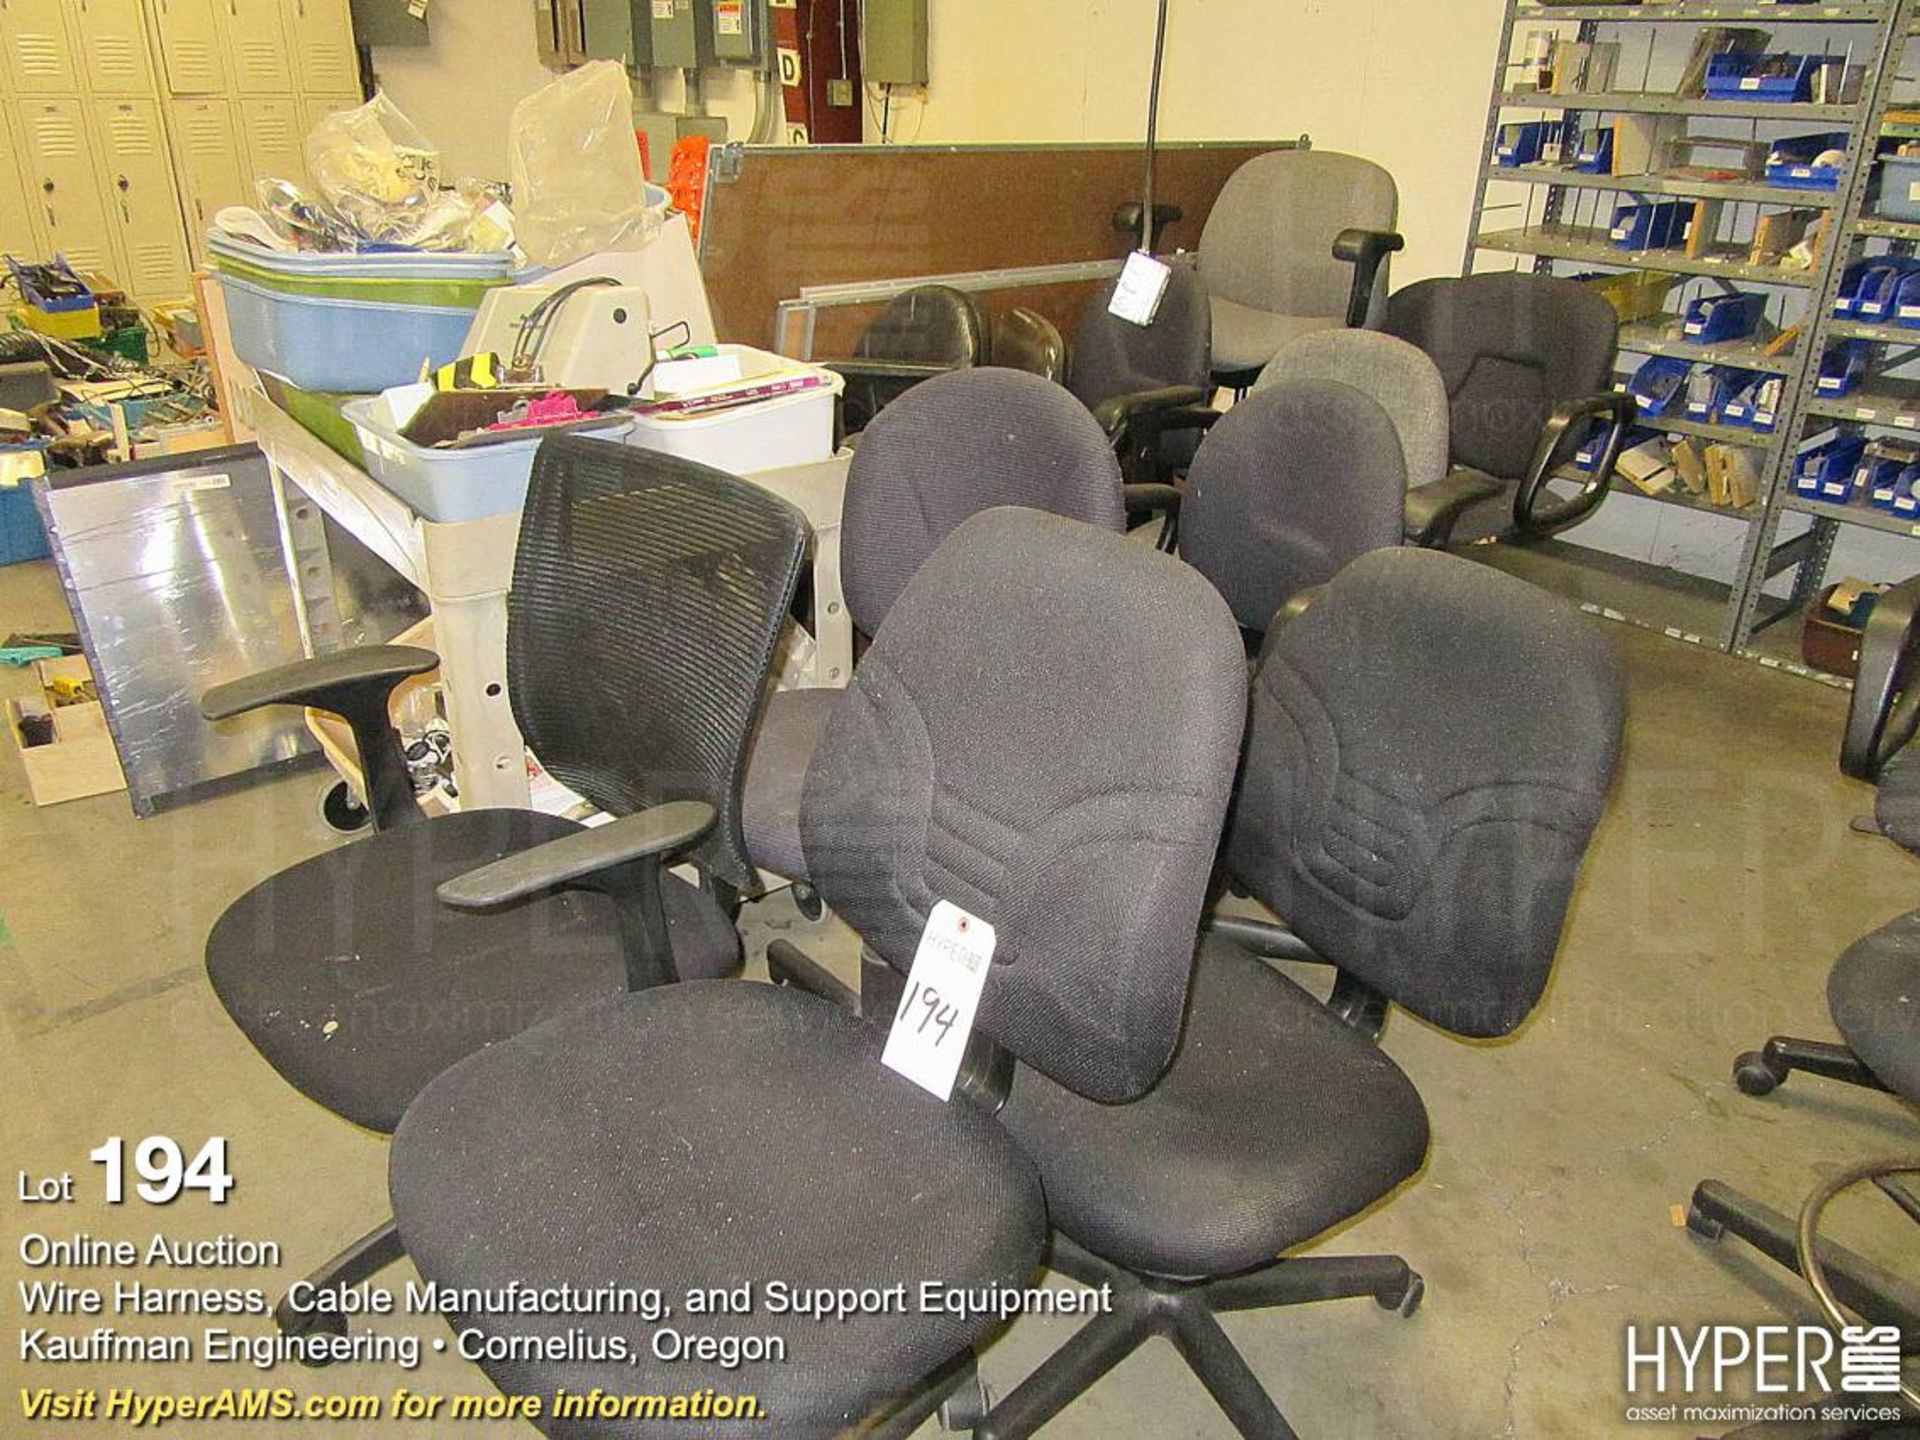 Assorted office chairs on casters.